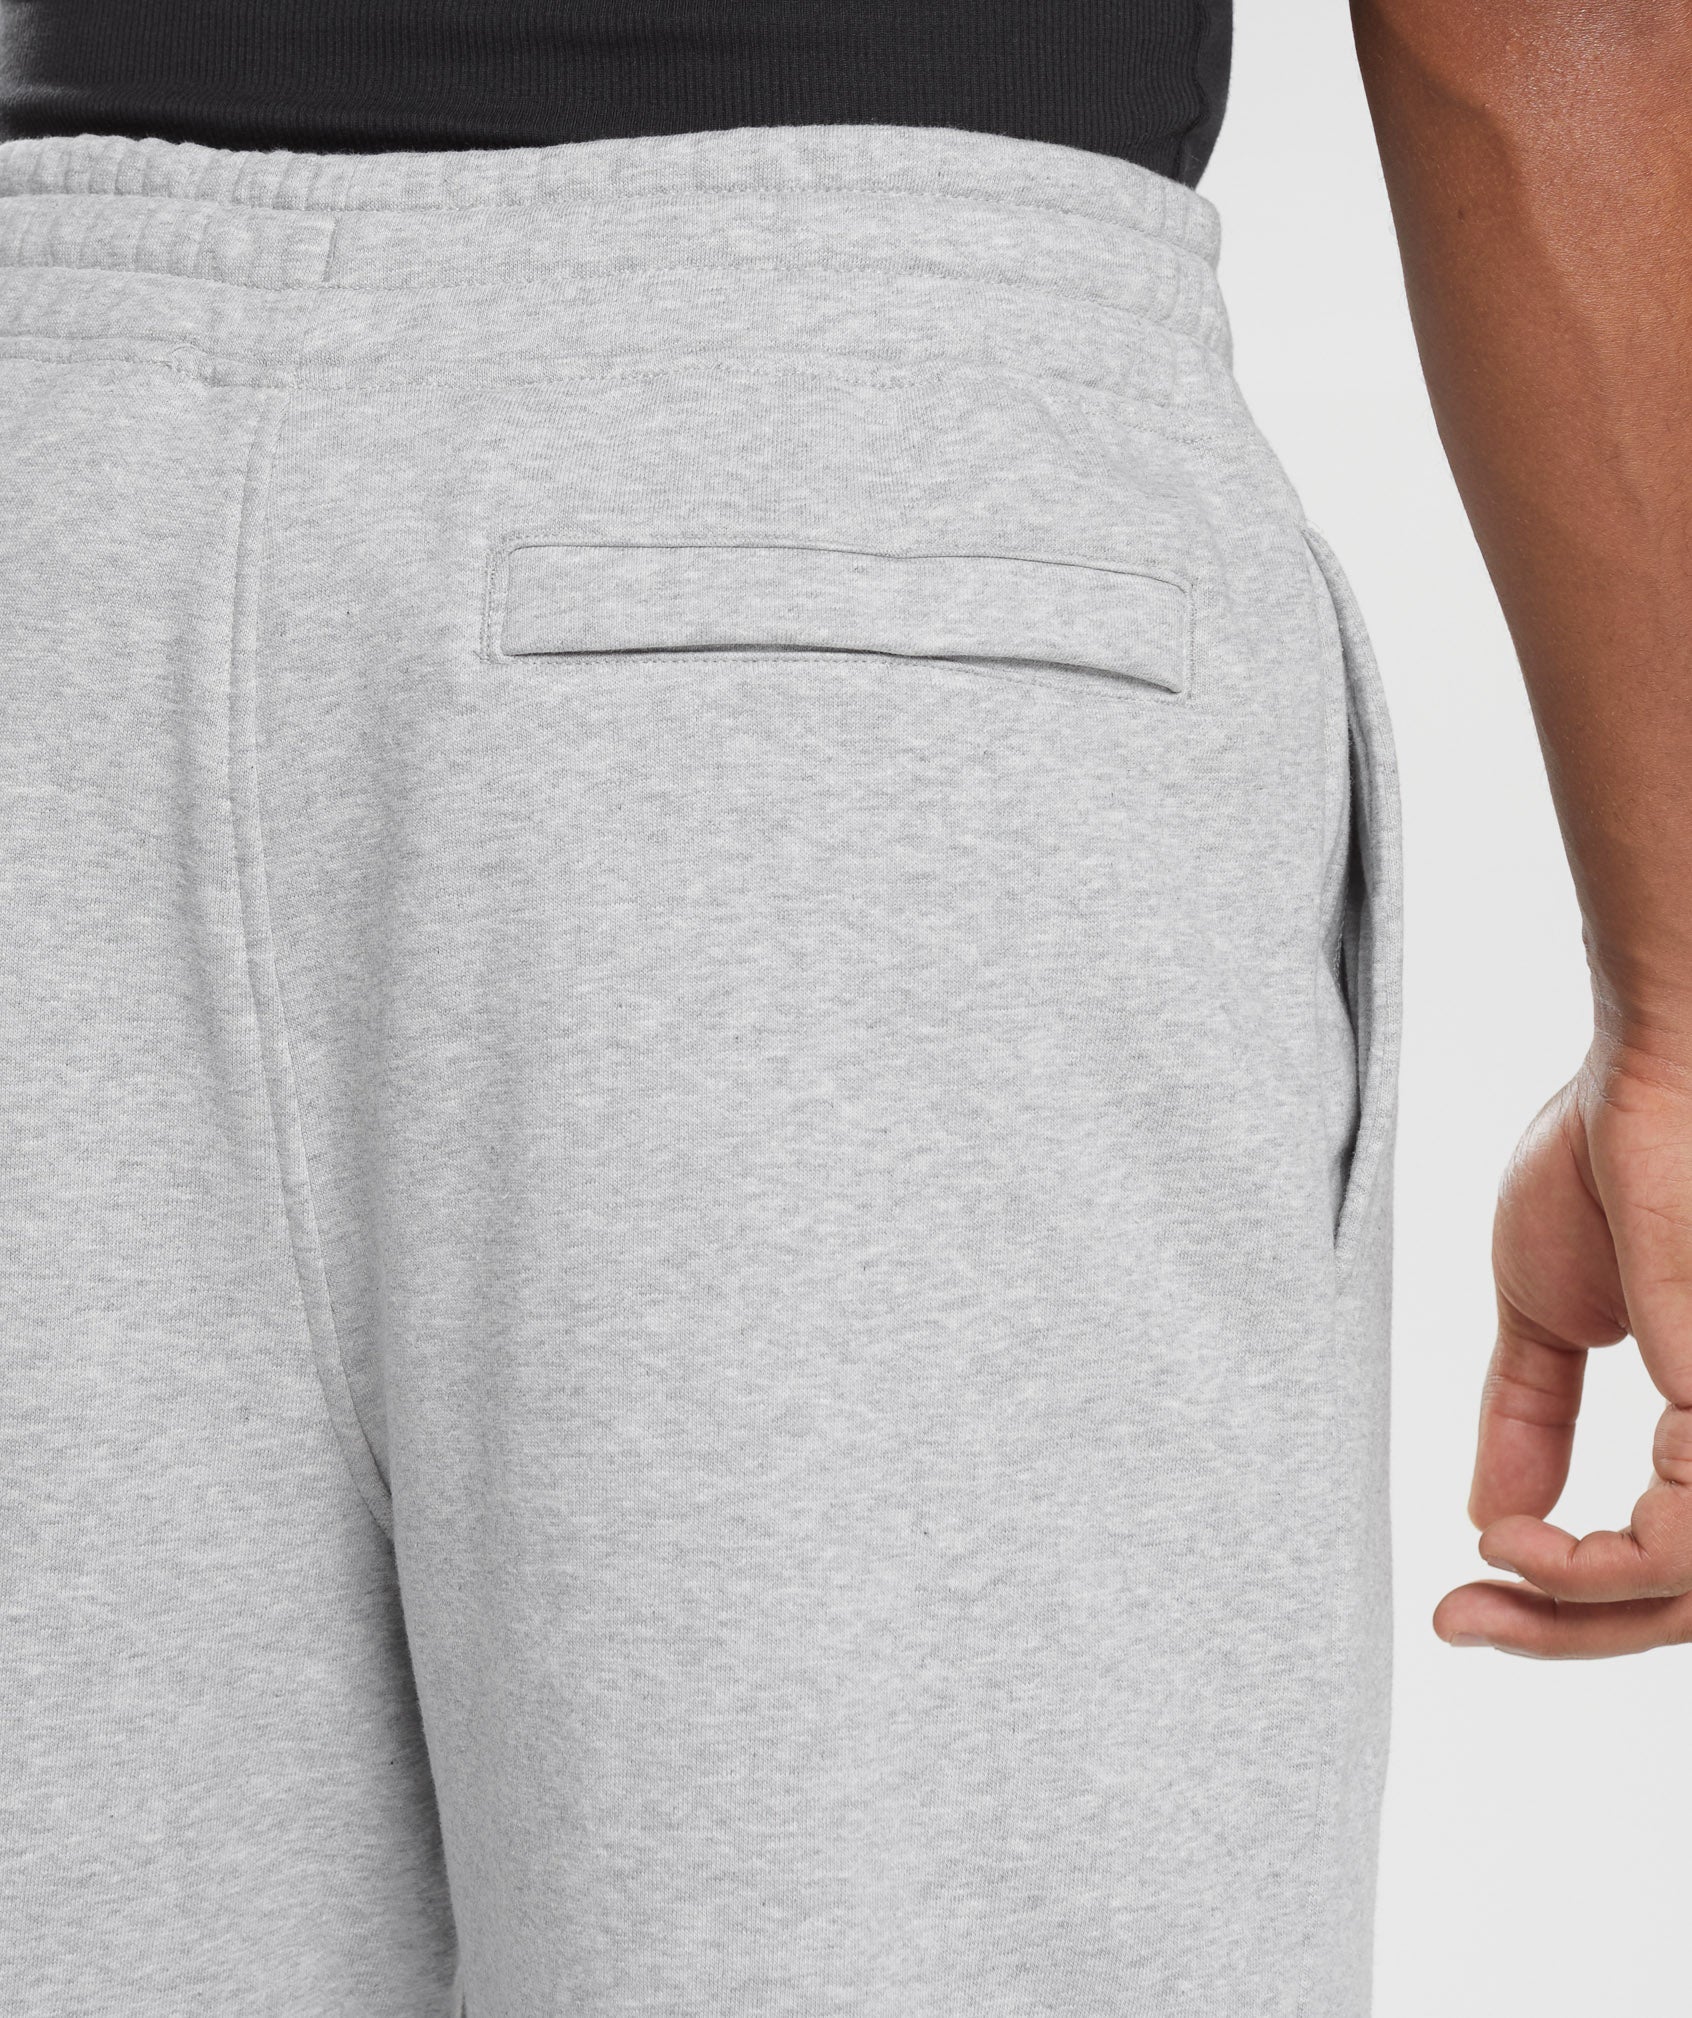 Crest Straight Leg Joggers in Light Grey Marl - view 6